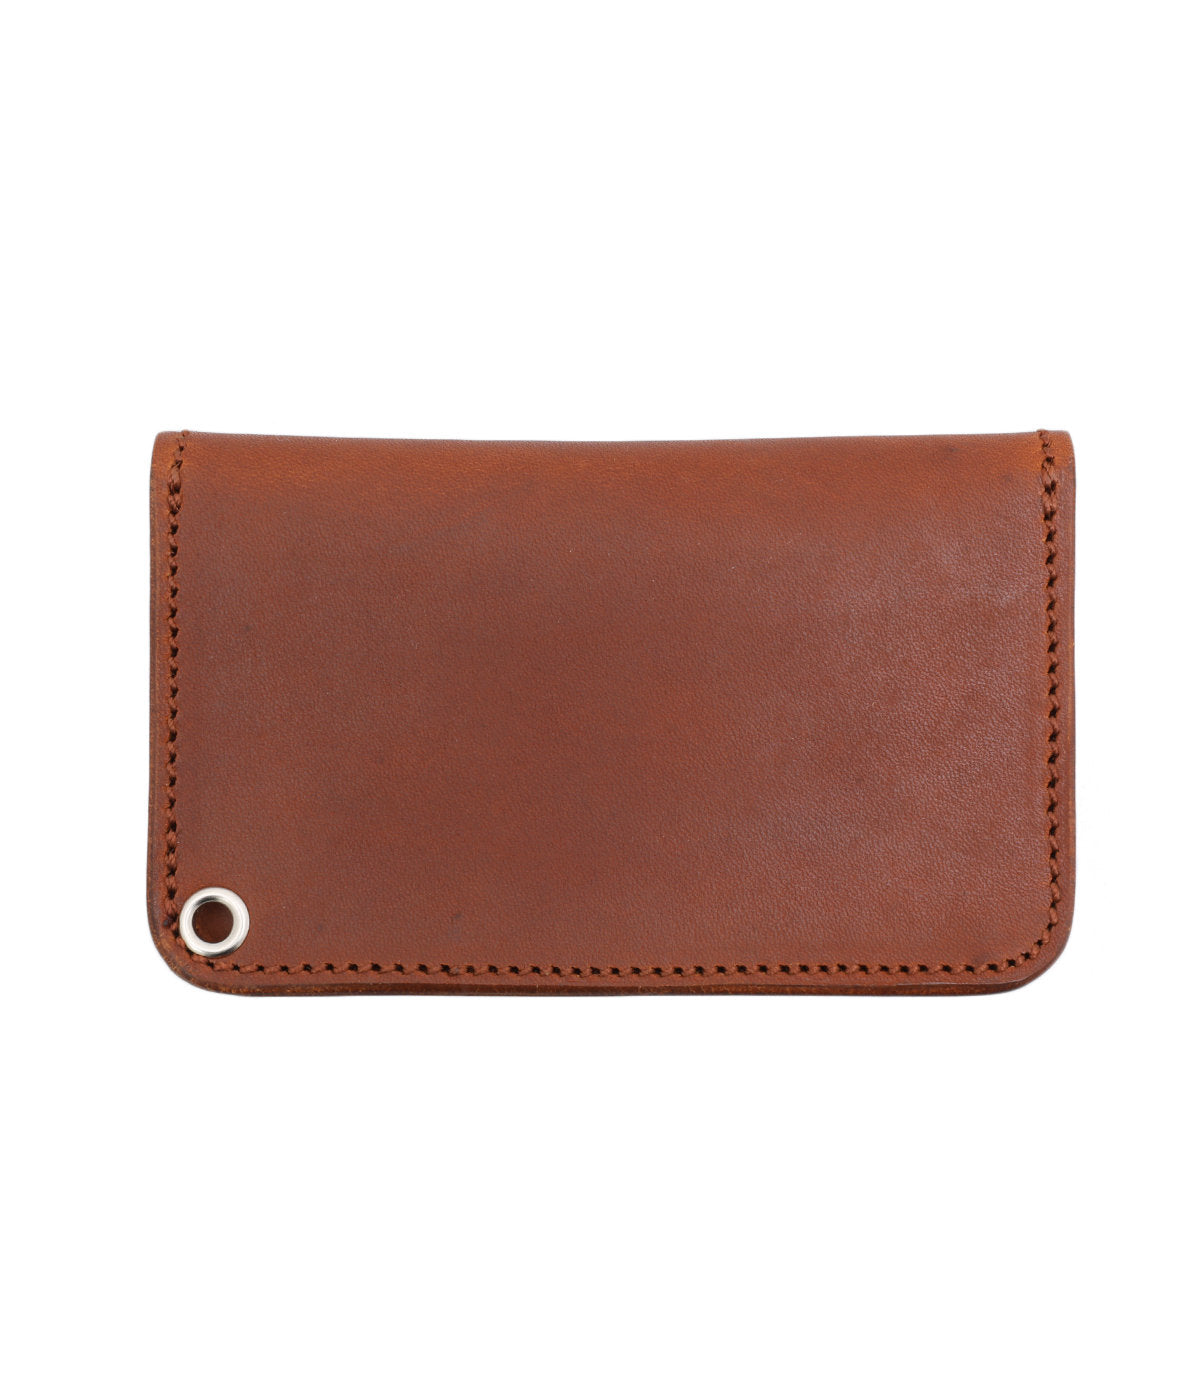 LARRY SMITH TRUCKERS WALLET No. 2 (TUQ SHELL) -S-